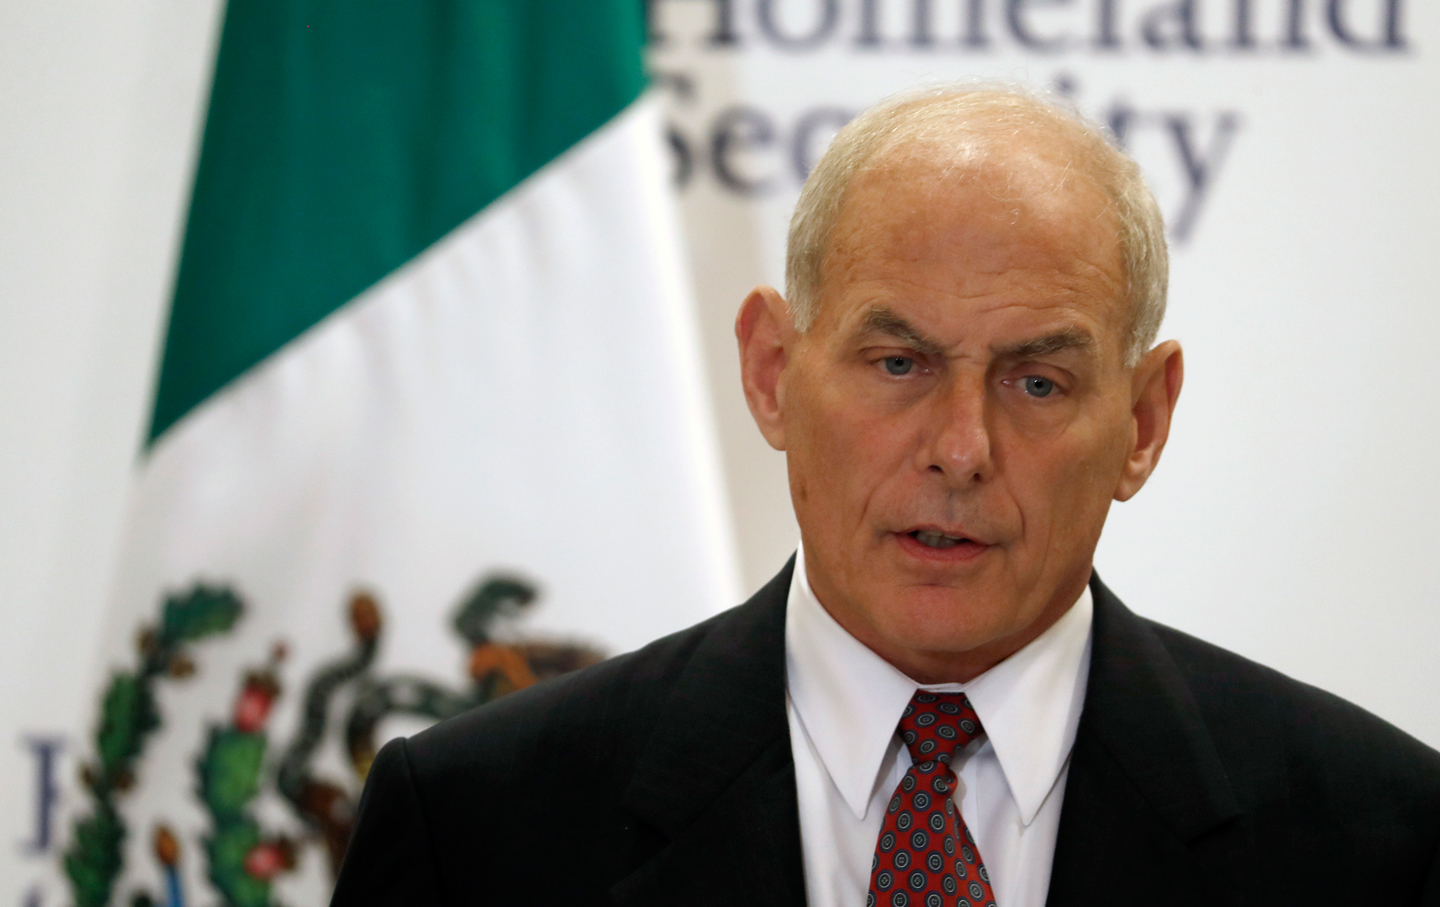 John Kelly’s Promotion Is a Disaster for Immigrants